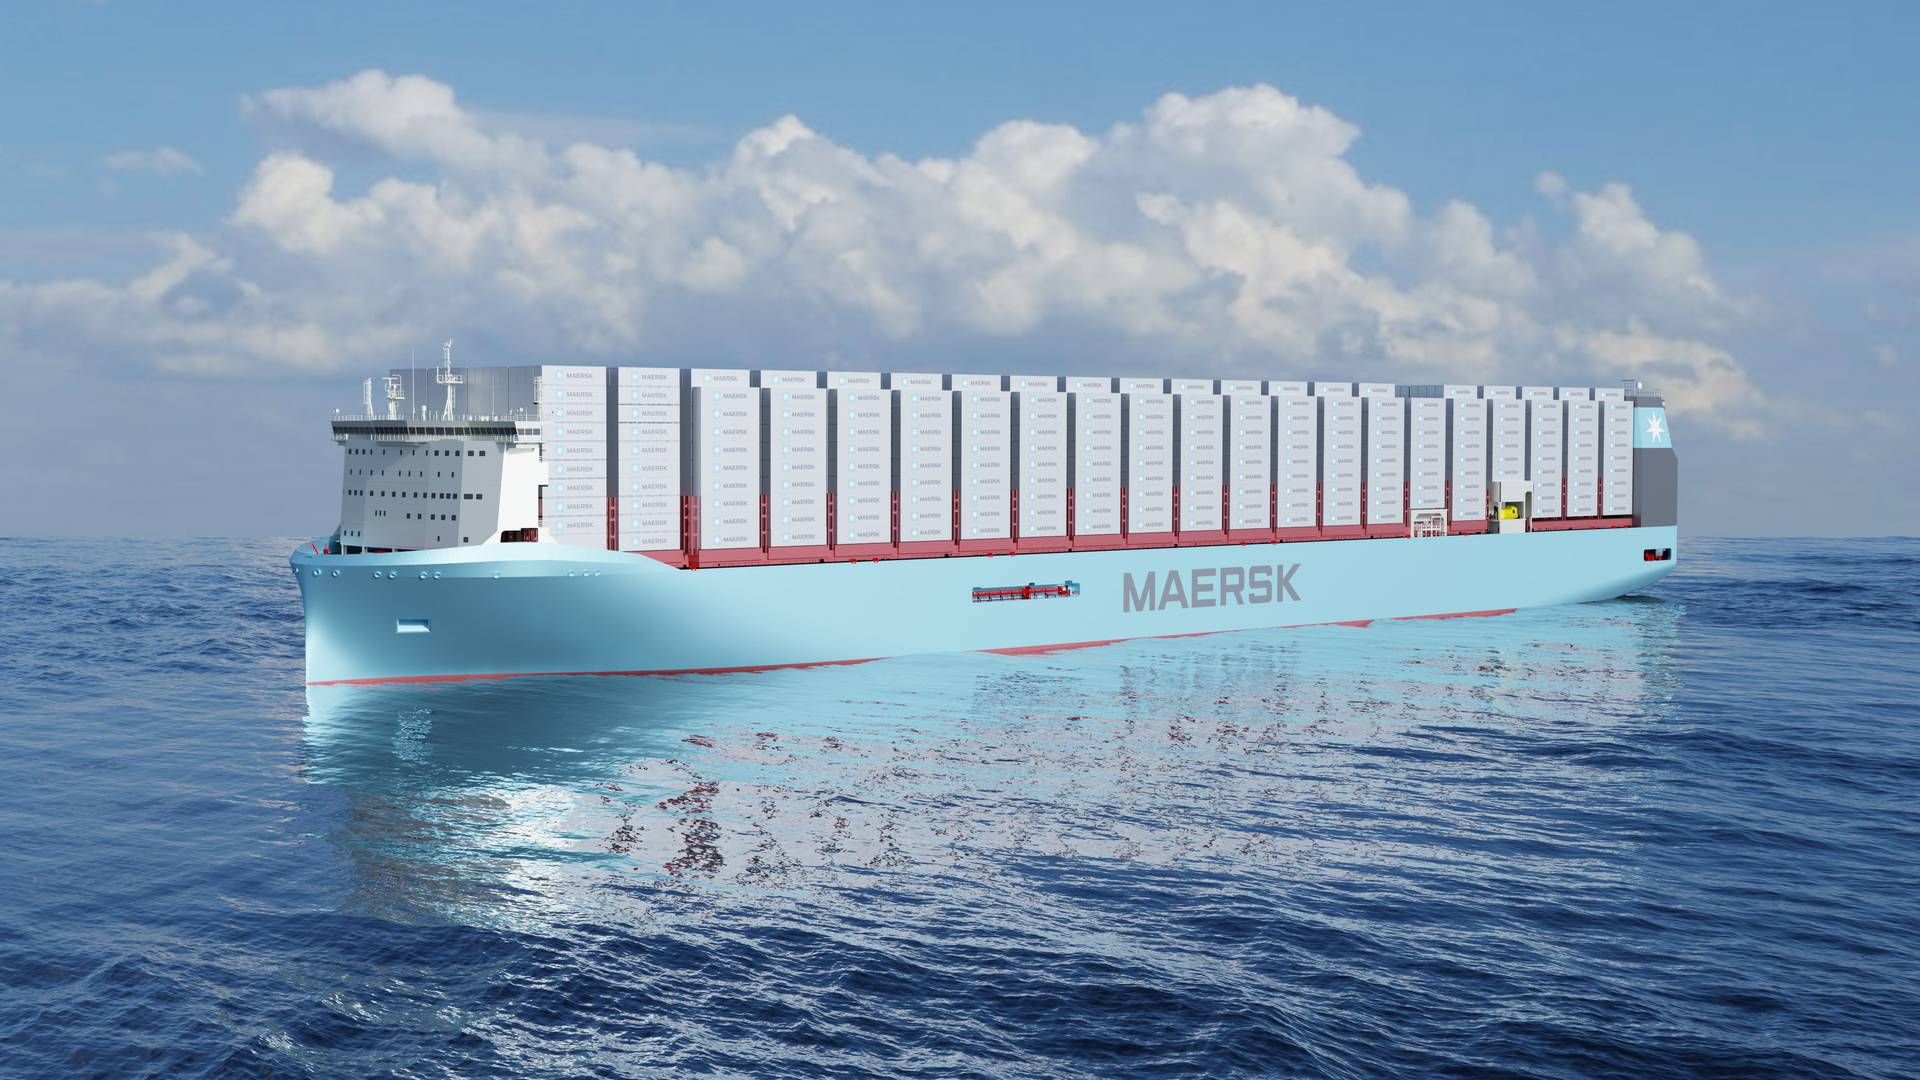 Design for a future Maersk container ship able to sail on green methanol. | Photo: Maersk